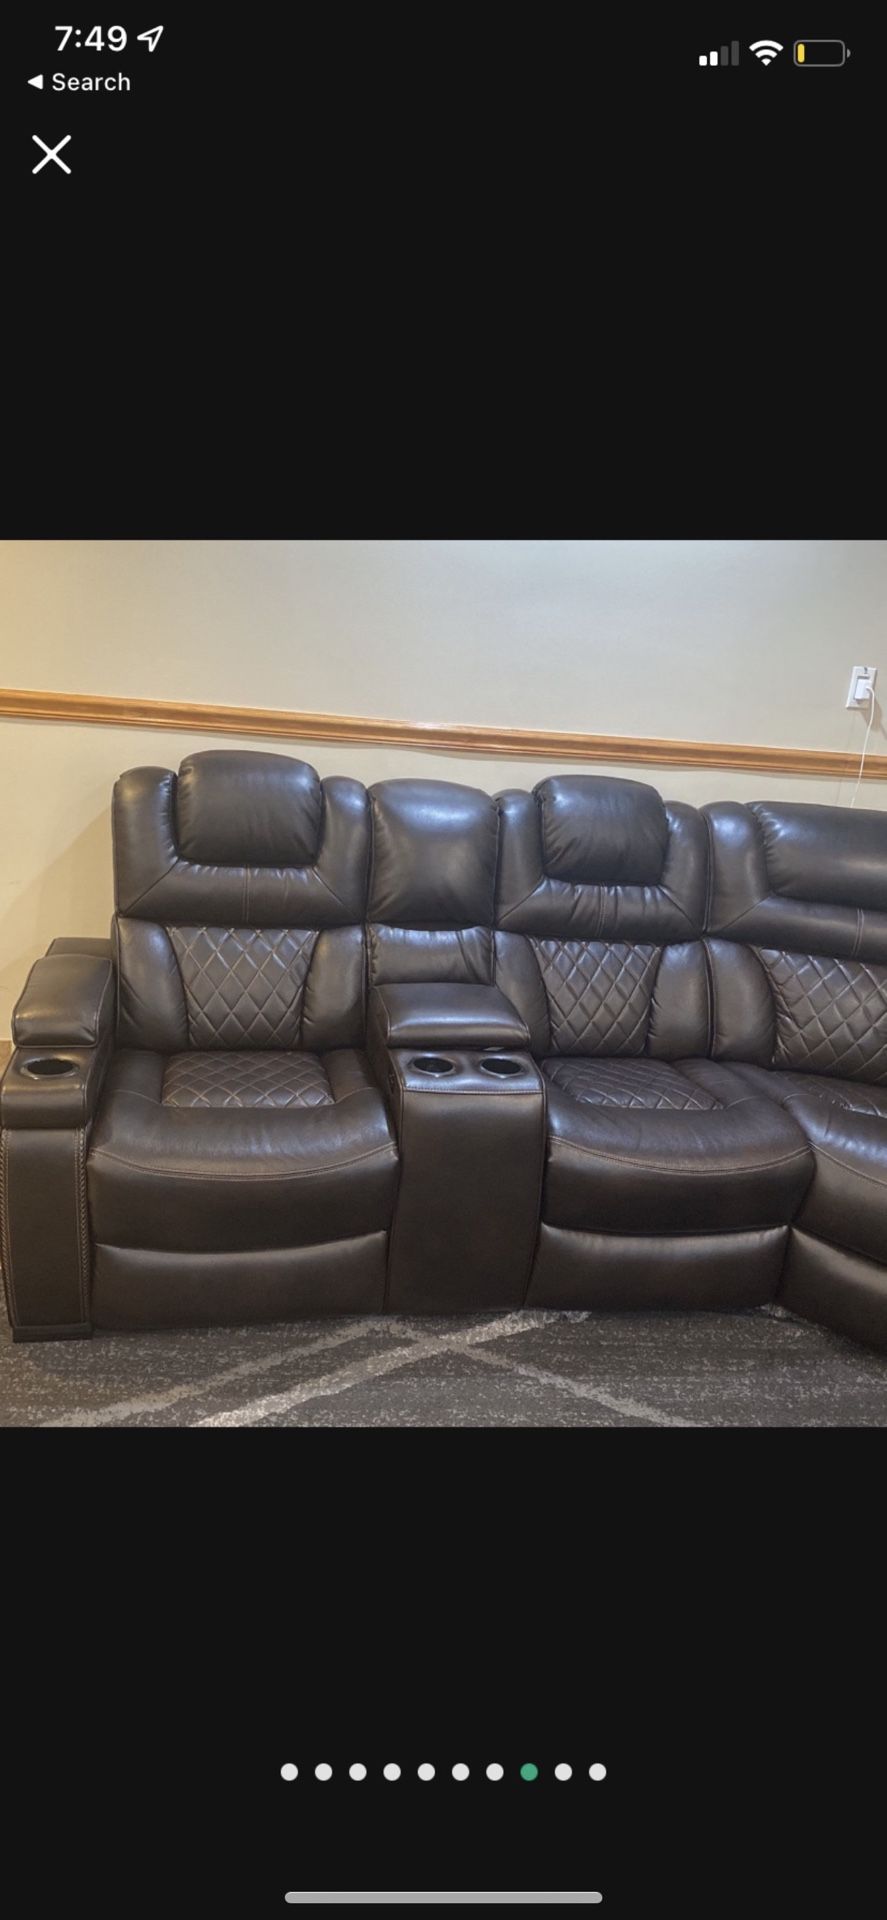 Seatcraft Anthem Media Room Set Top Grain Leather 7000, Recliner Couch, Power Headrests, Power Recline, Black